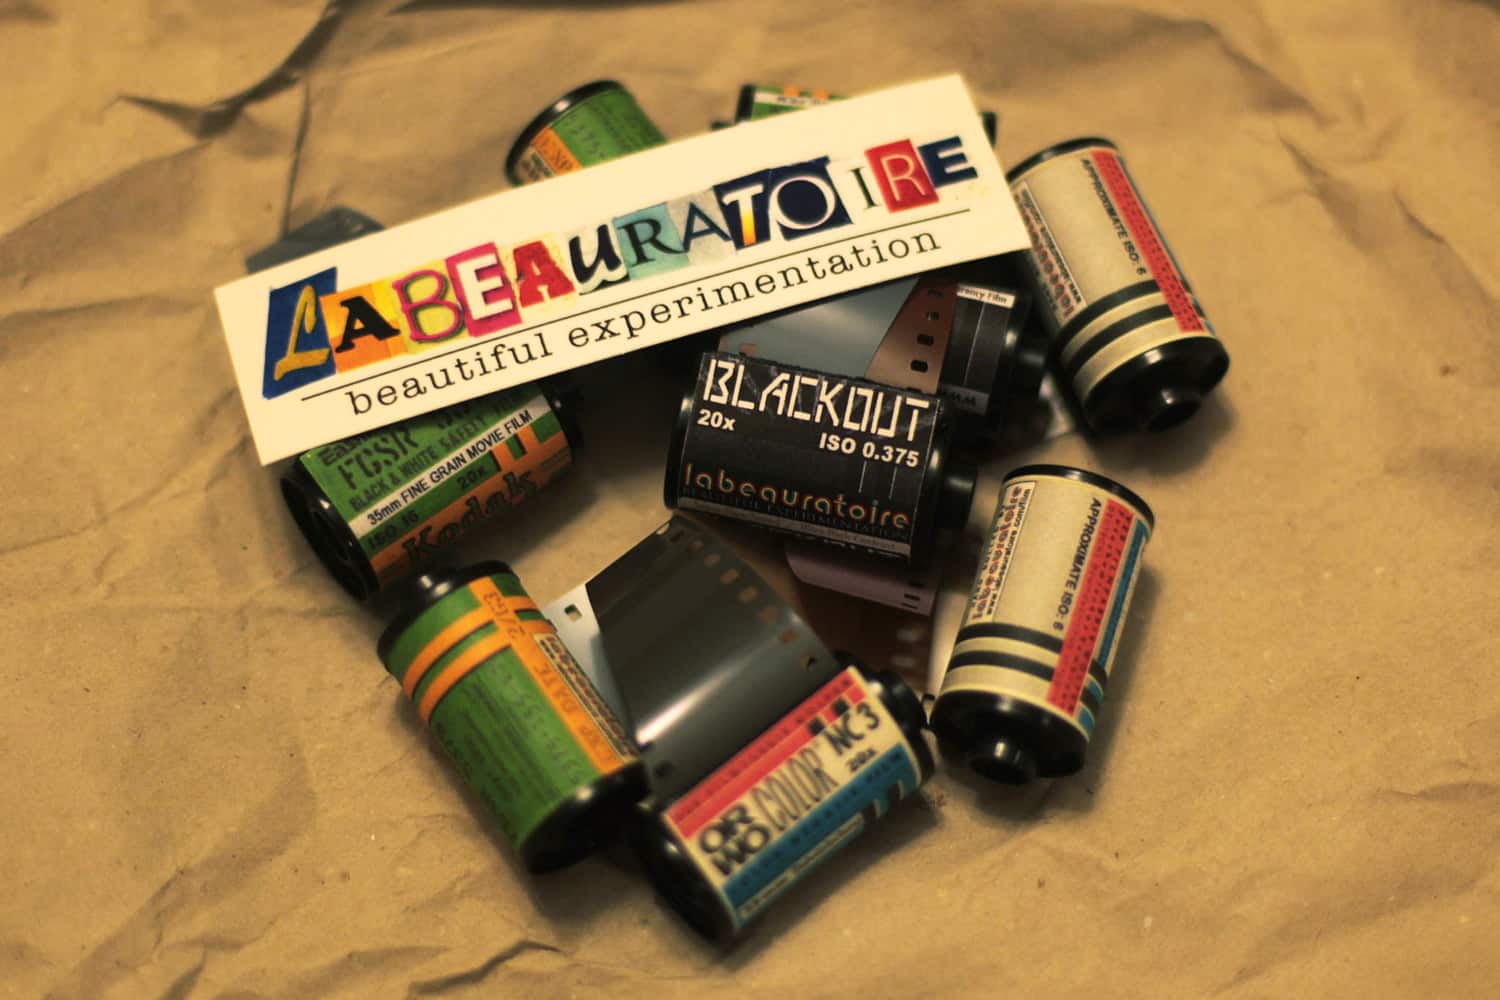 Camera Geekery: Interview with Lance Rothstein of Labeauratoire